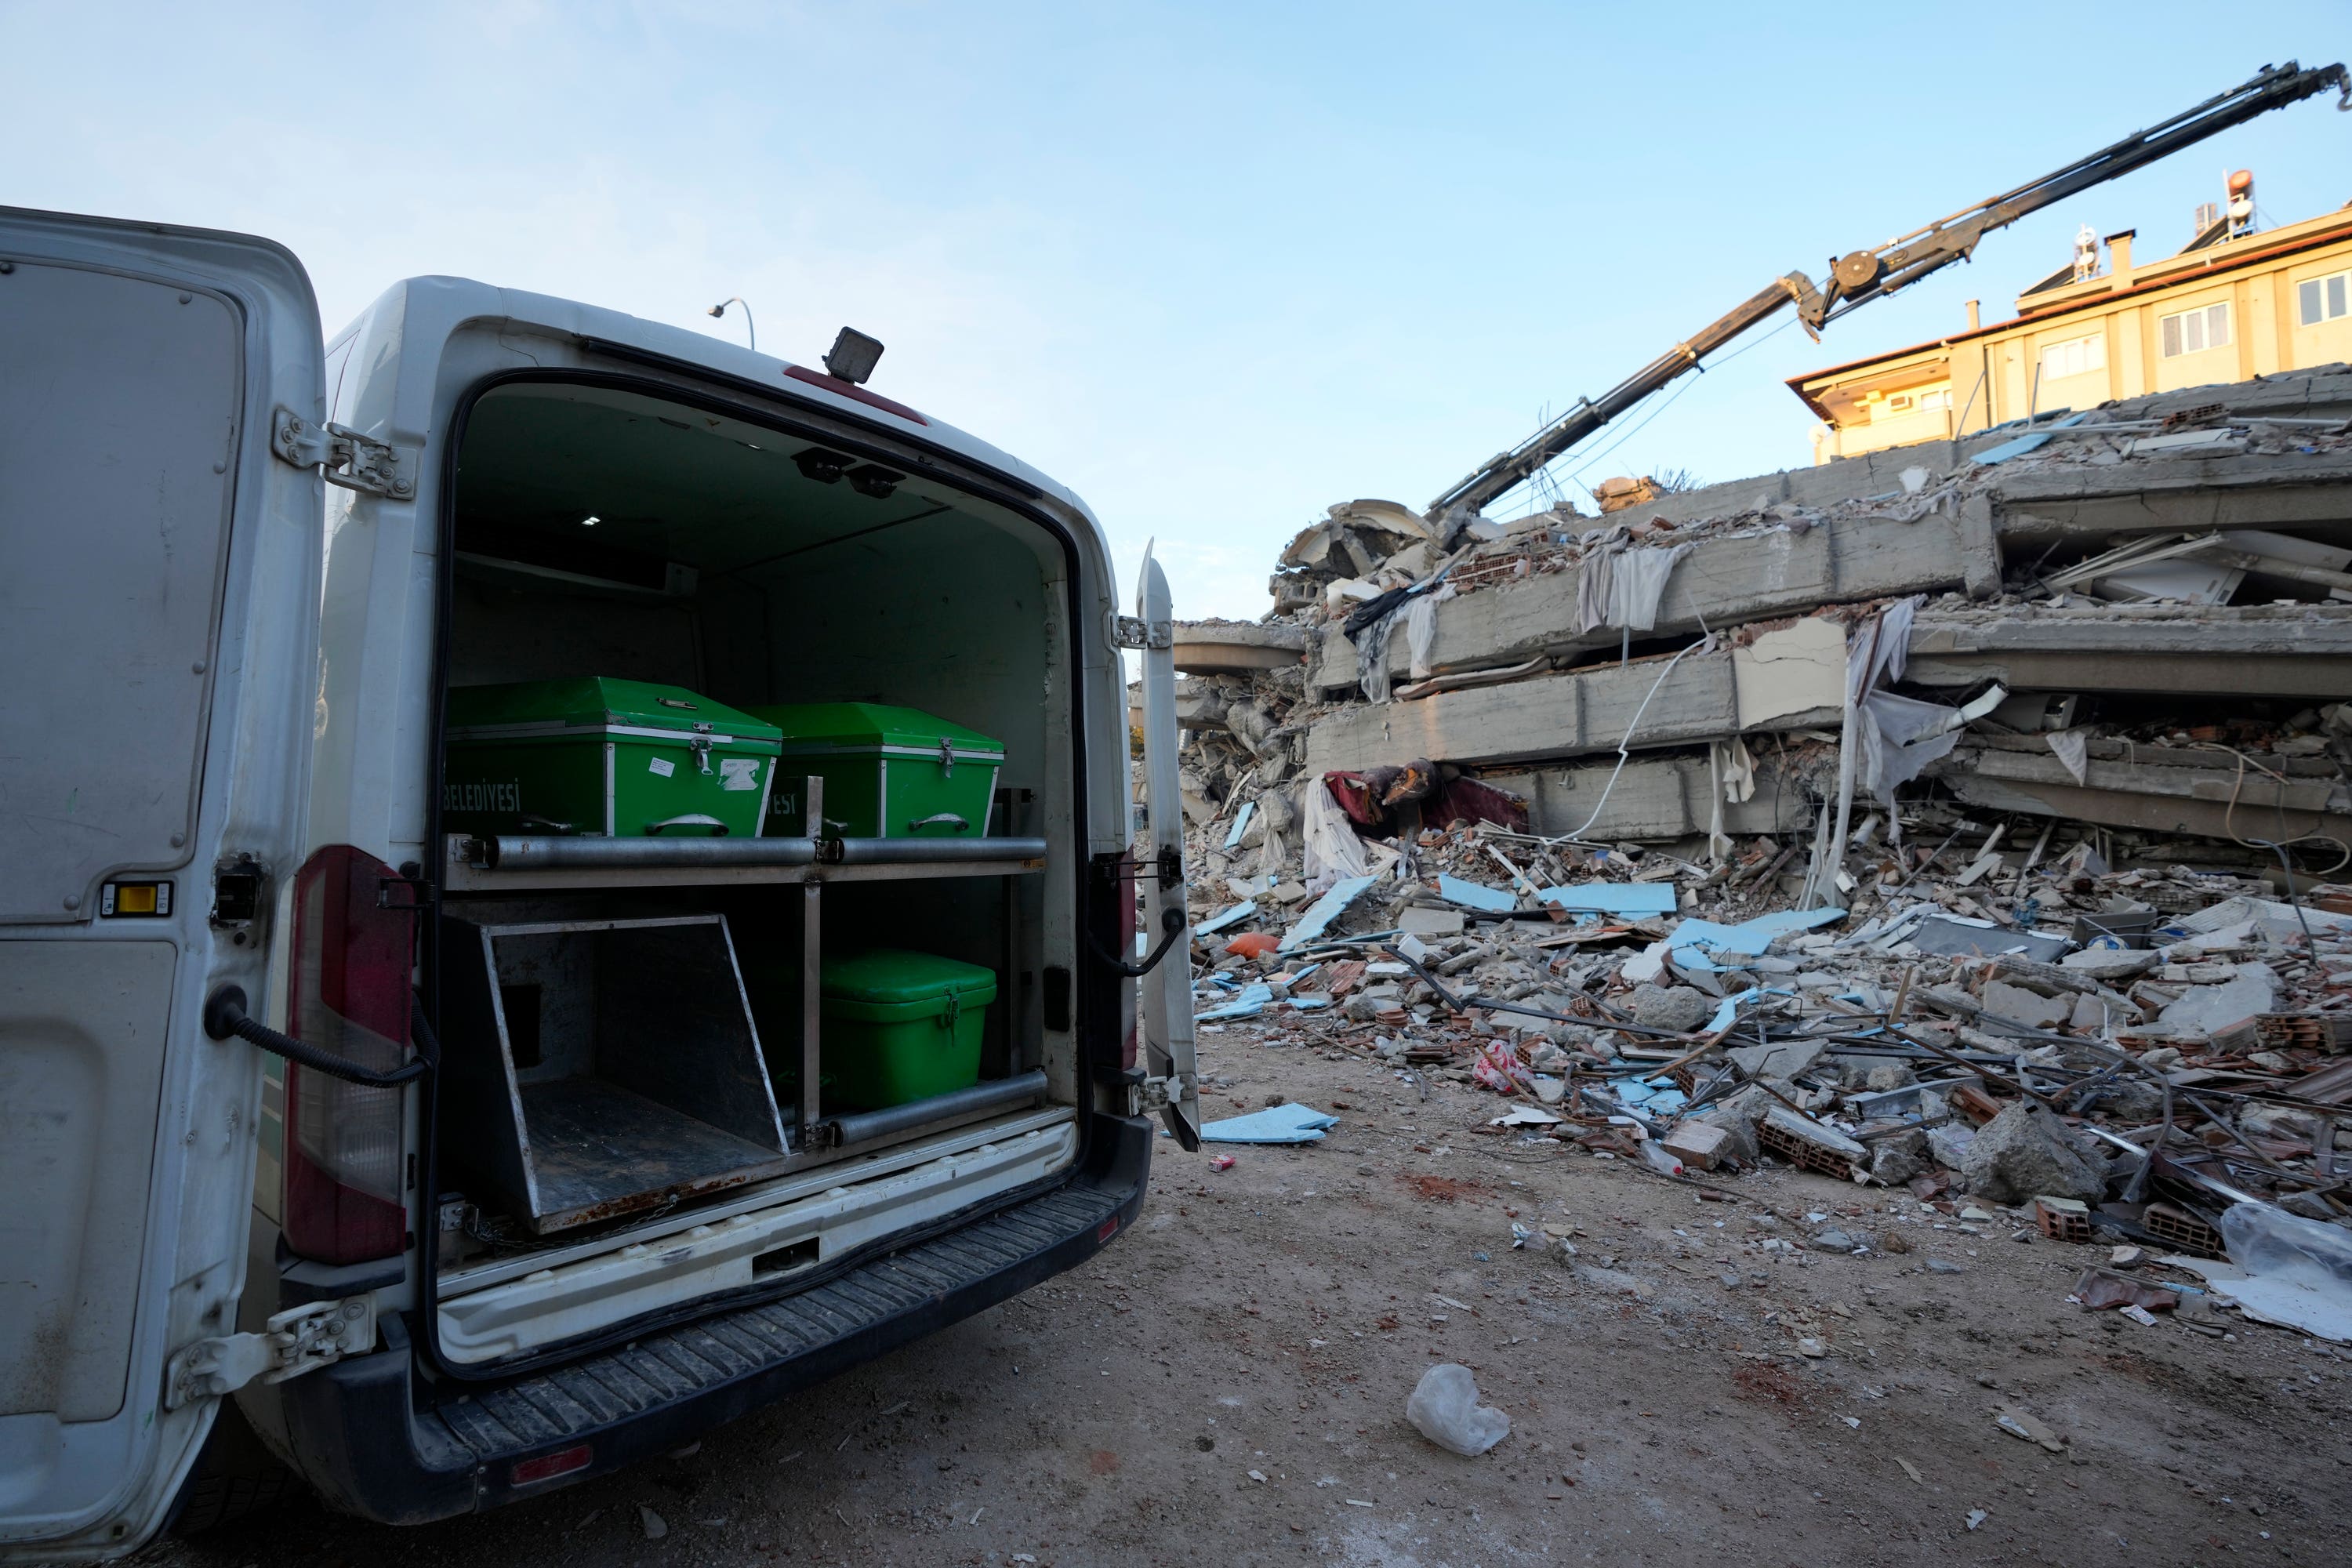  van with coffins is parked next to a destroyed building in Gaziantep, south-east Turkey (Kamran Jebreili/AP)